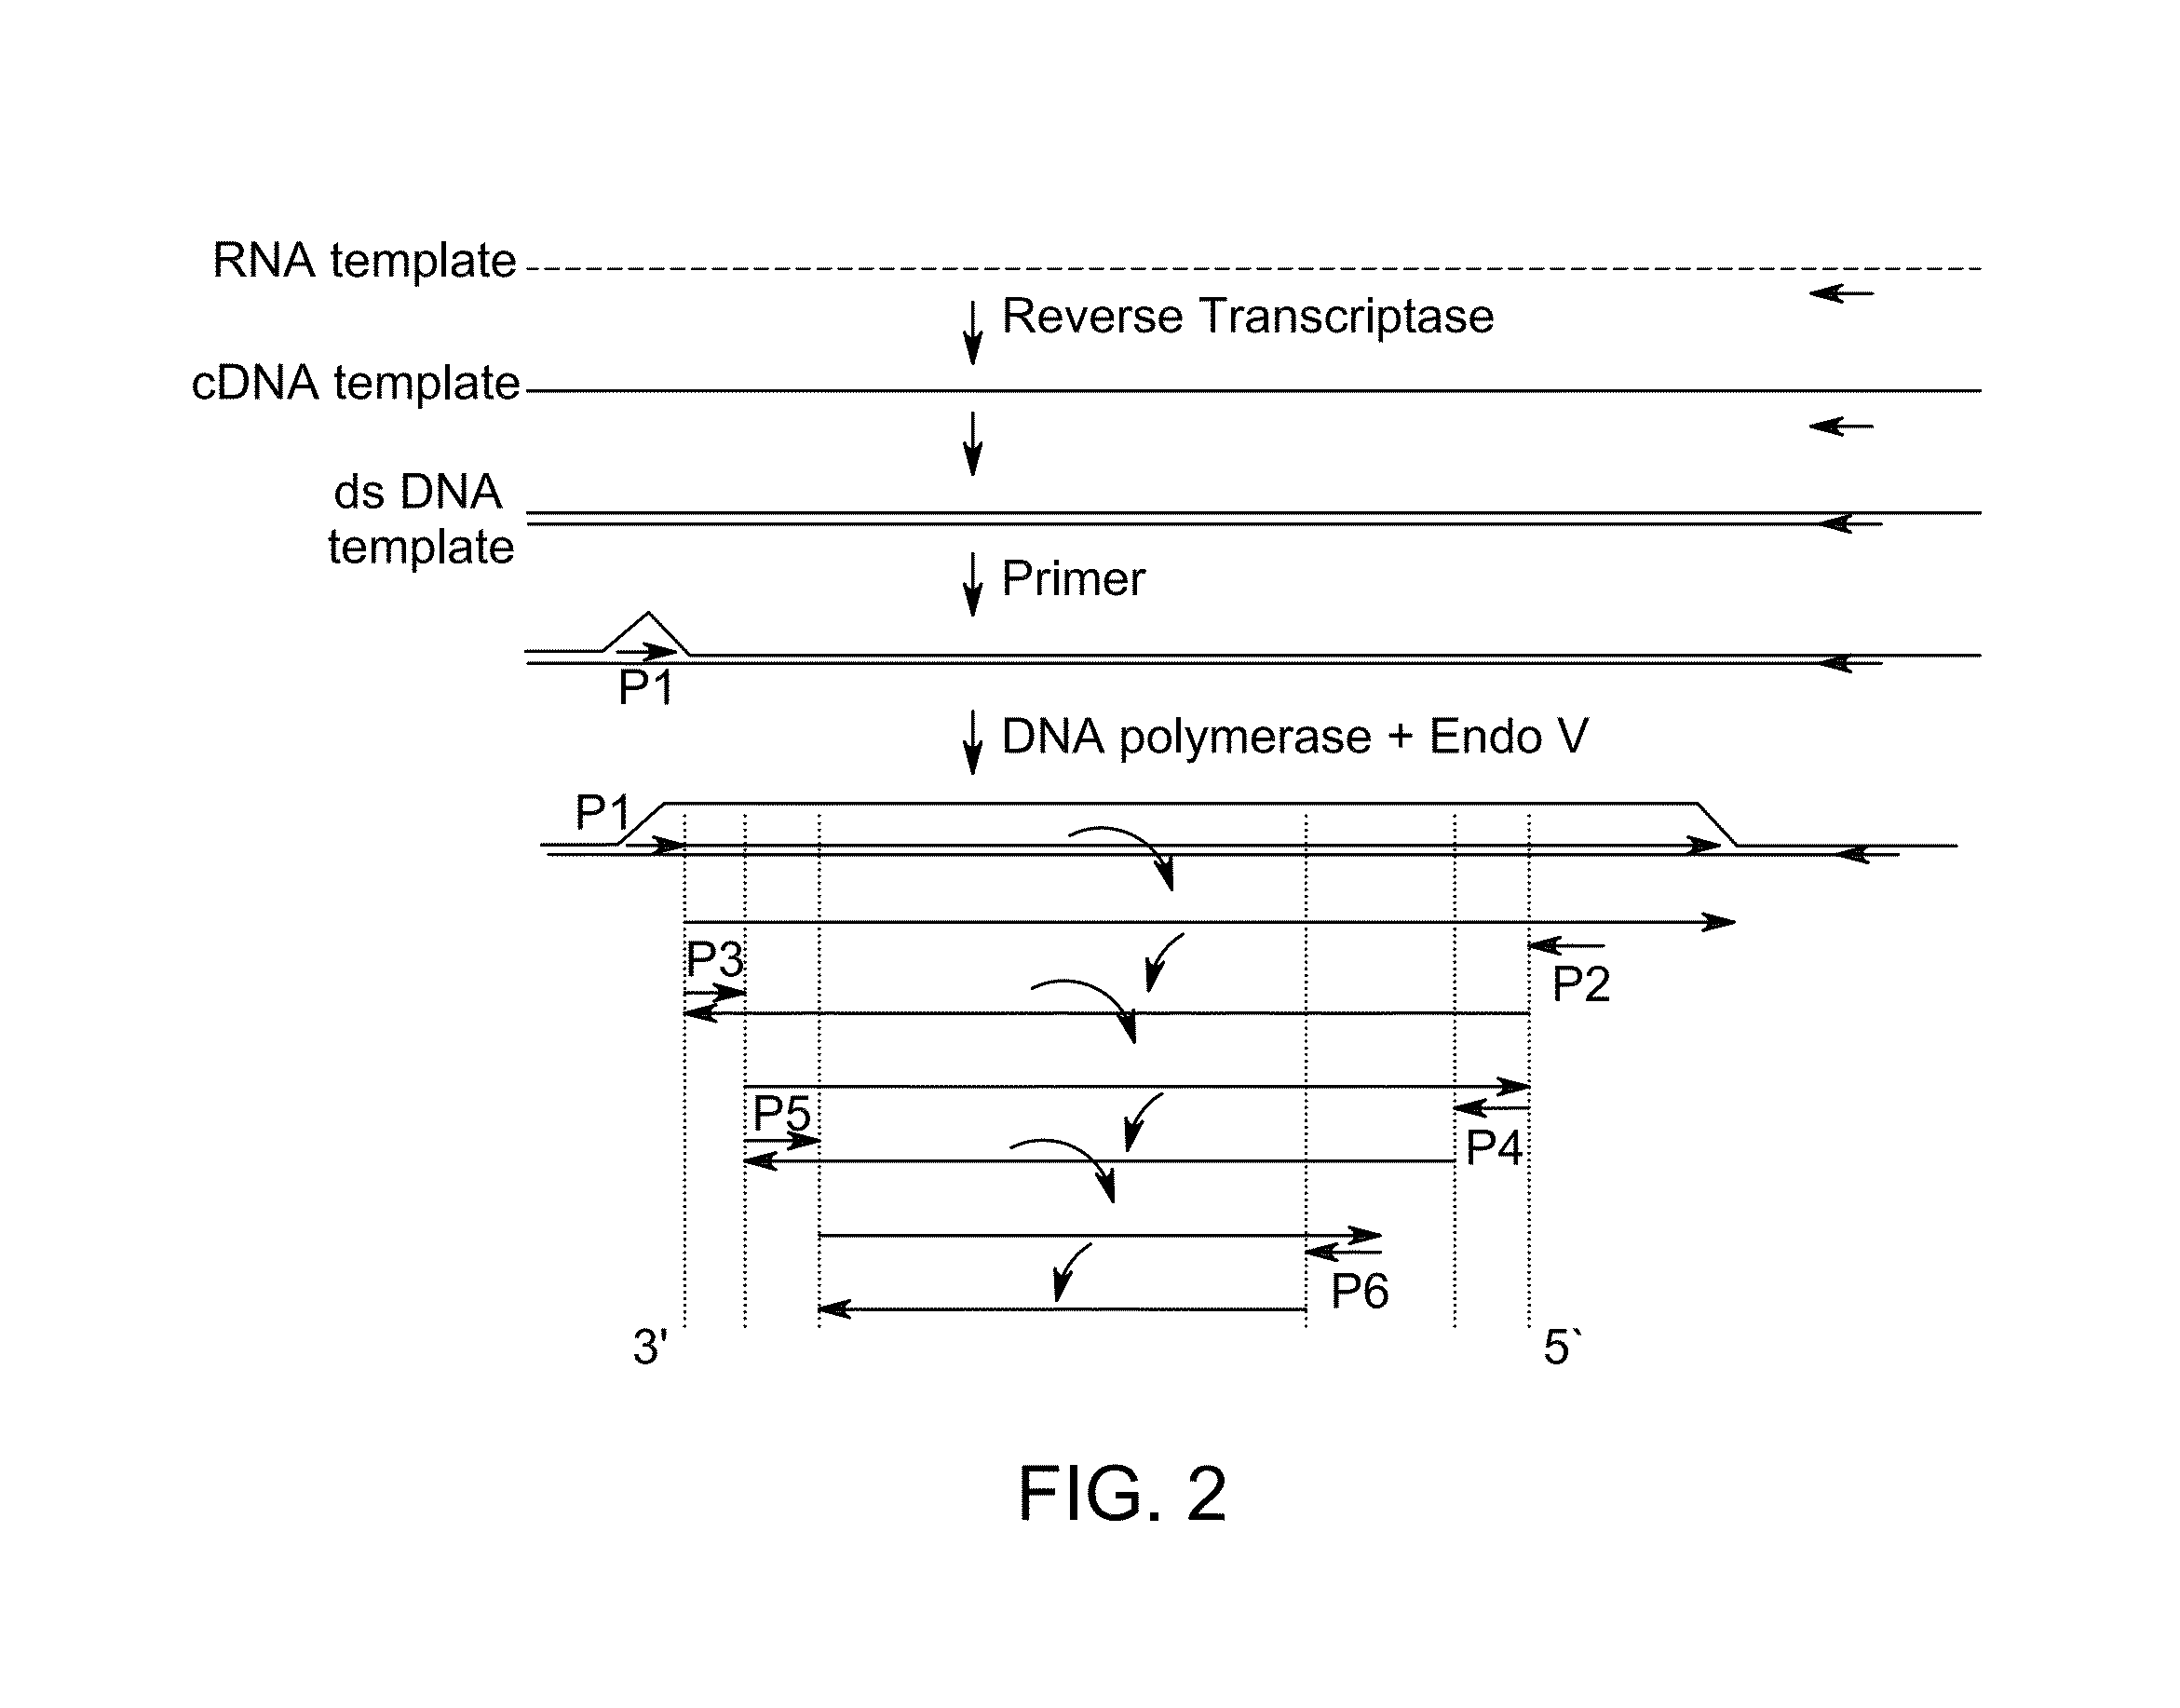 Kit for isothermal DNA amplification starting from an RNA template